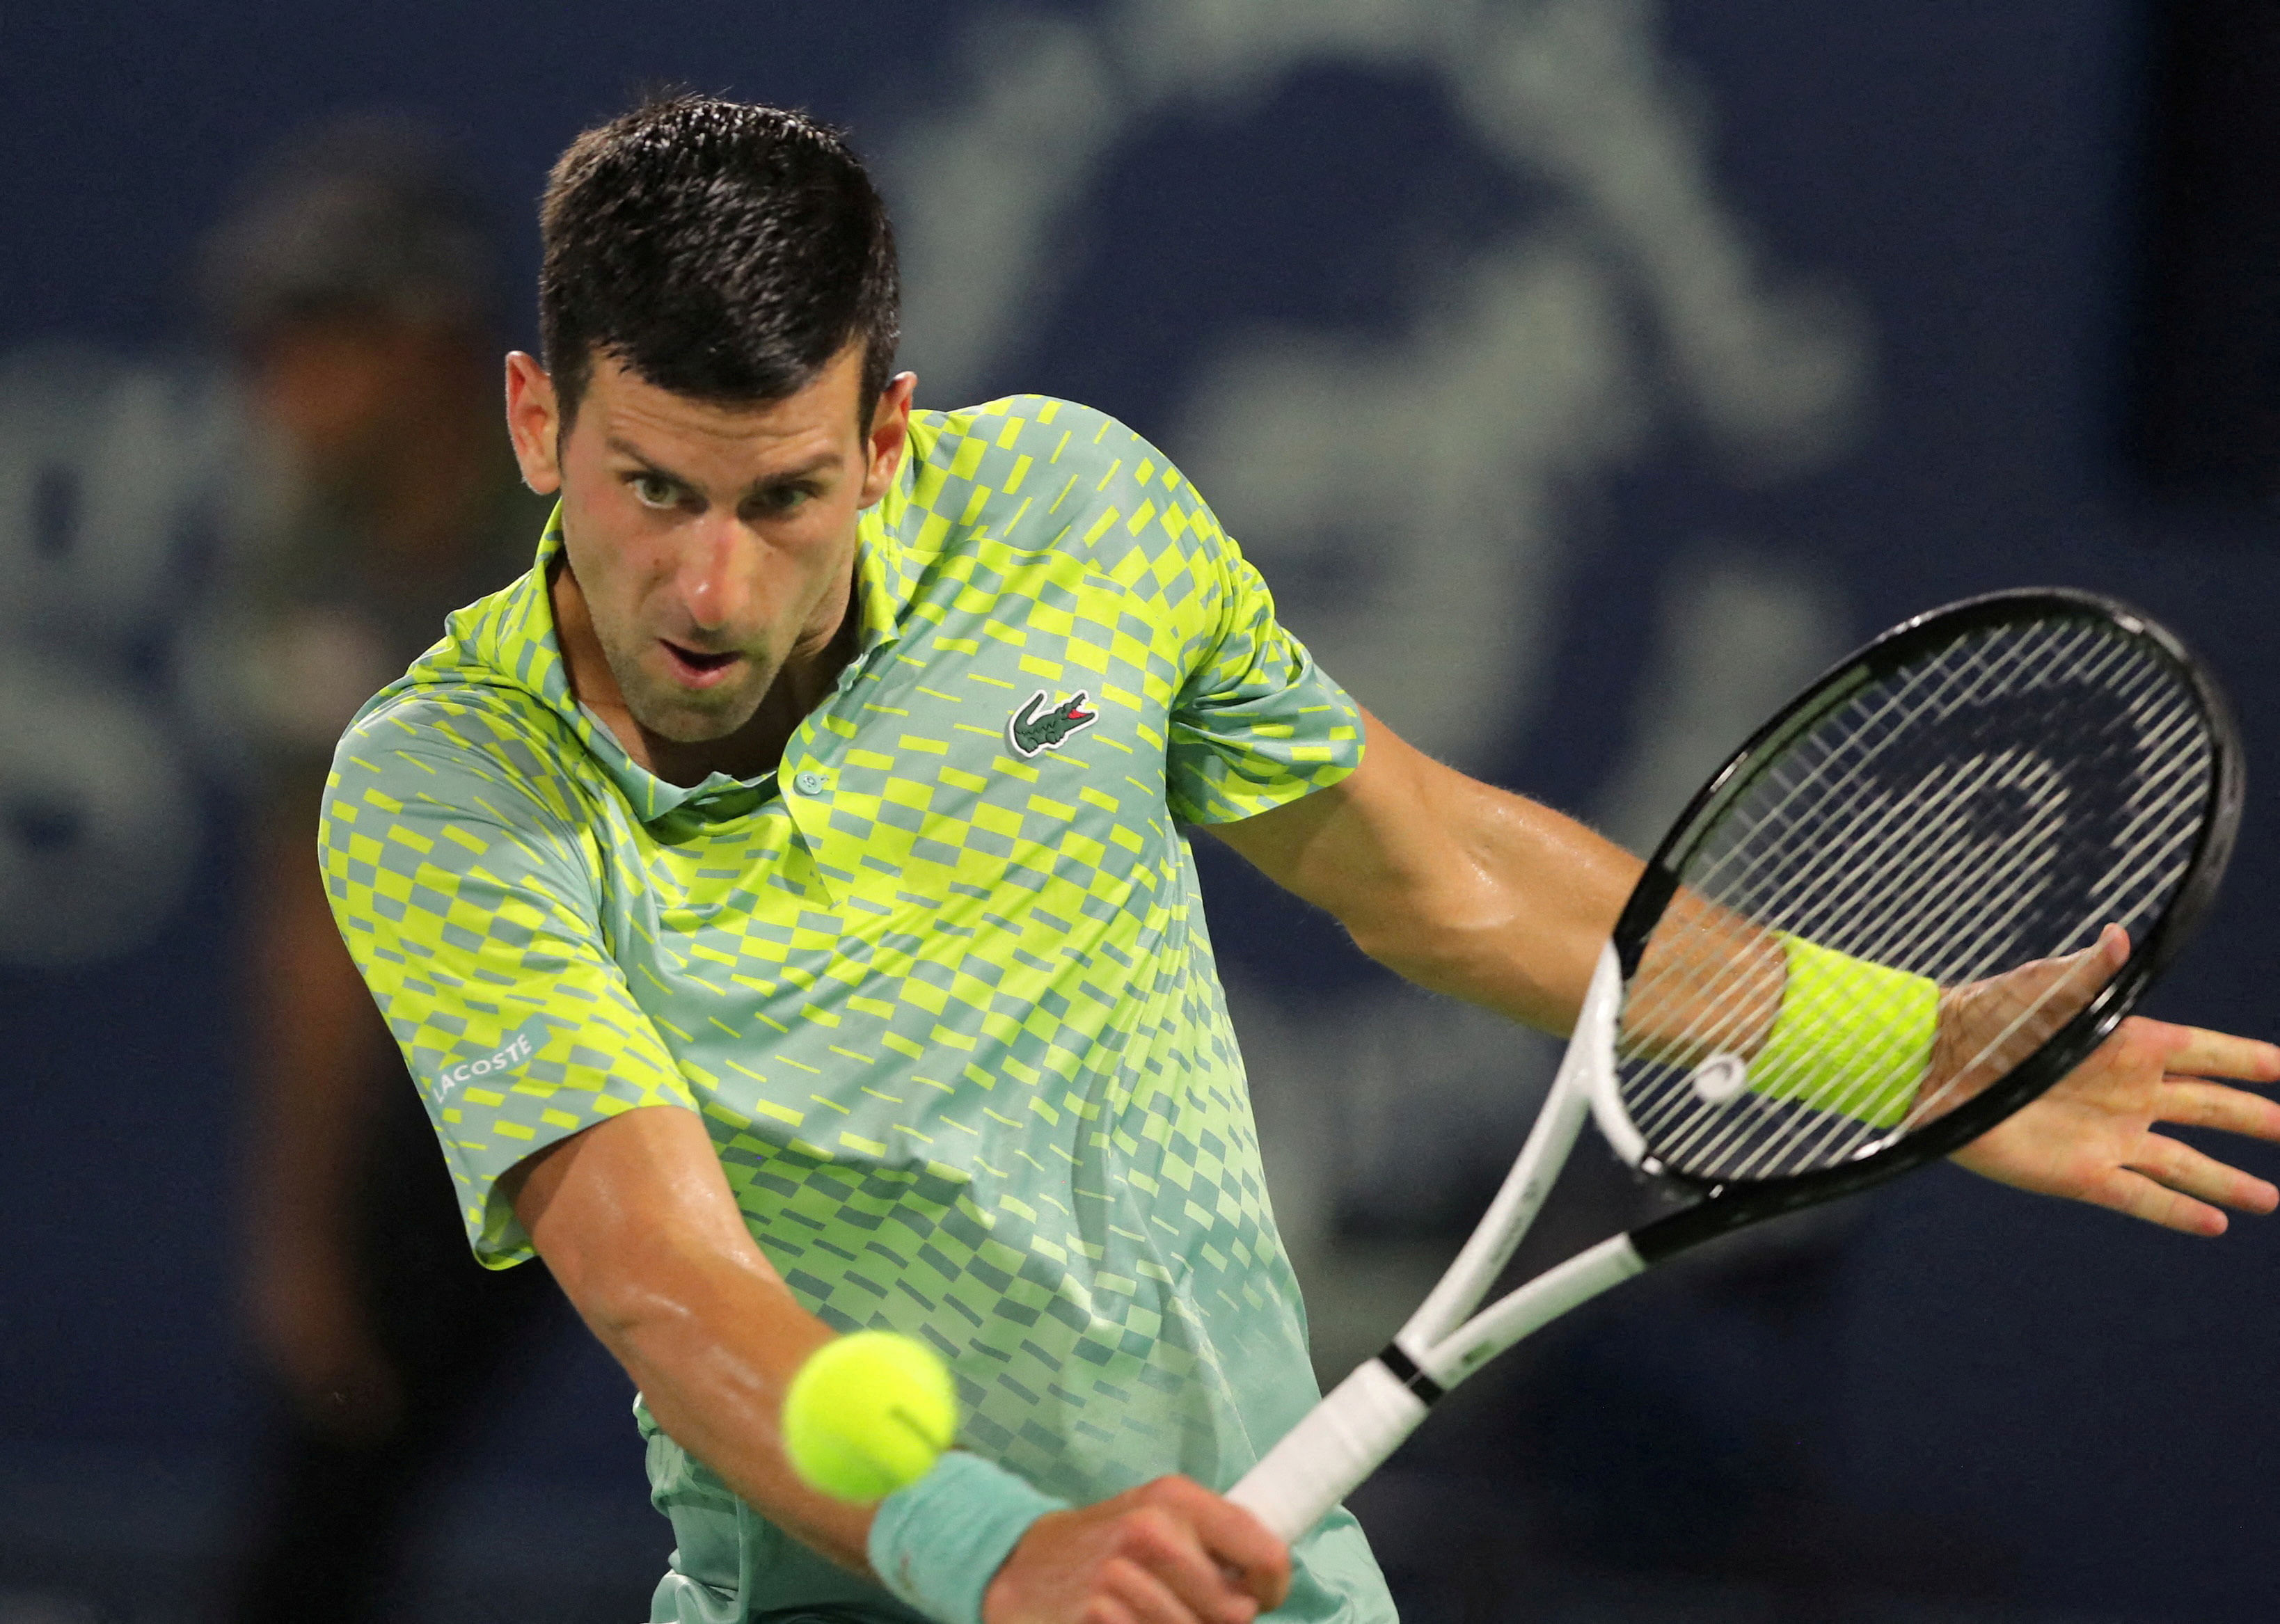 Djokovic 'motivated' to hit clay running at Monte Carlo - Khmer Times